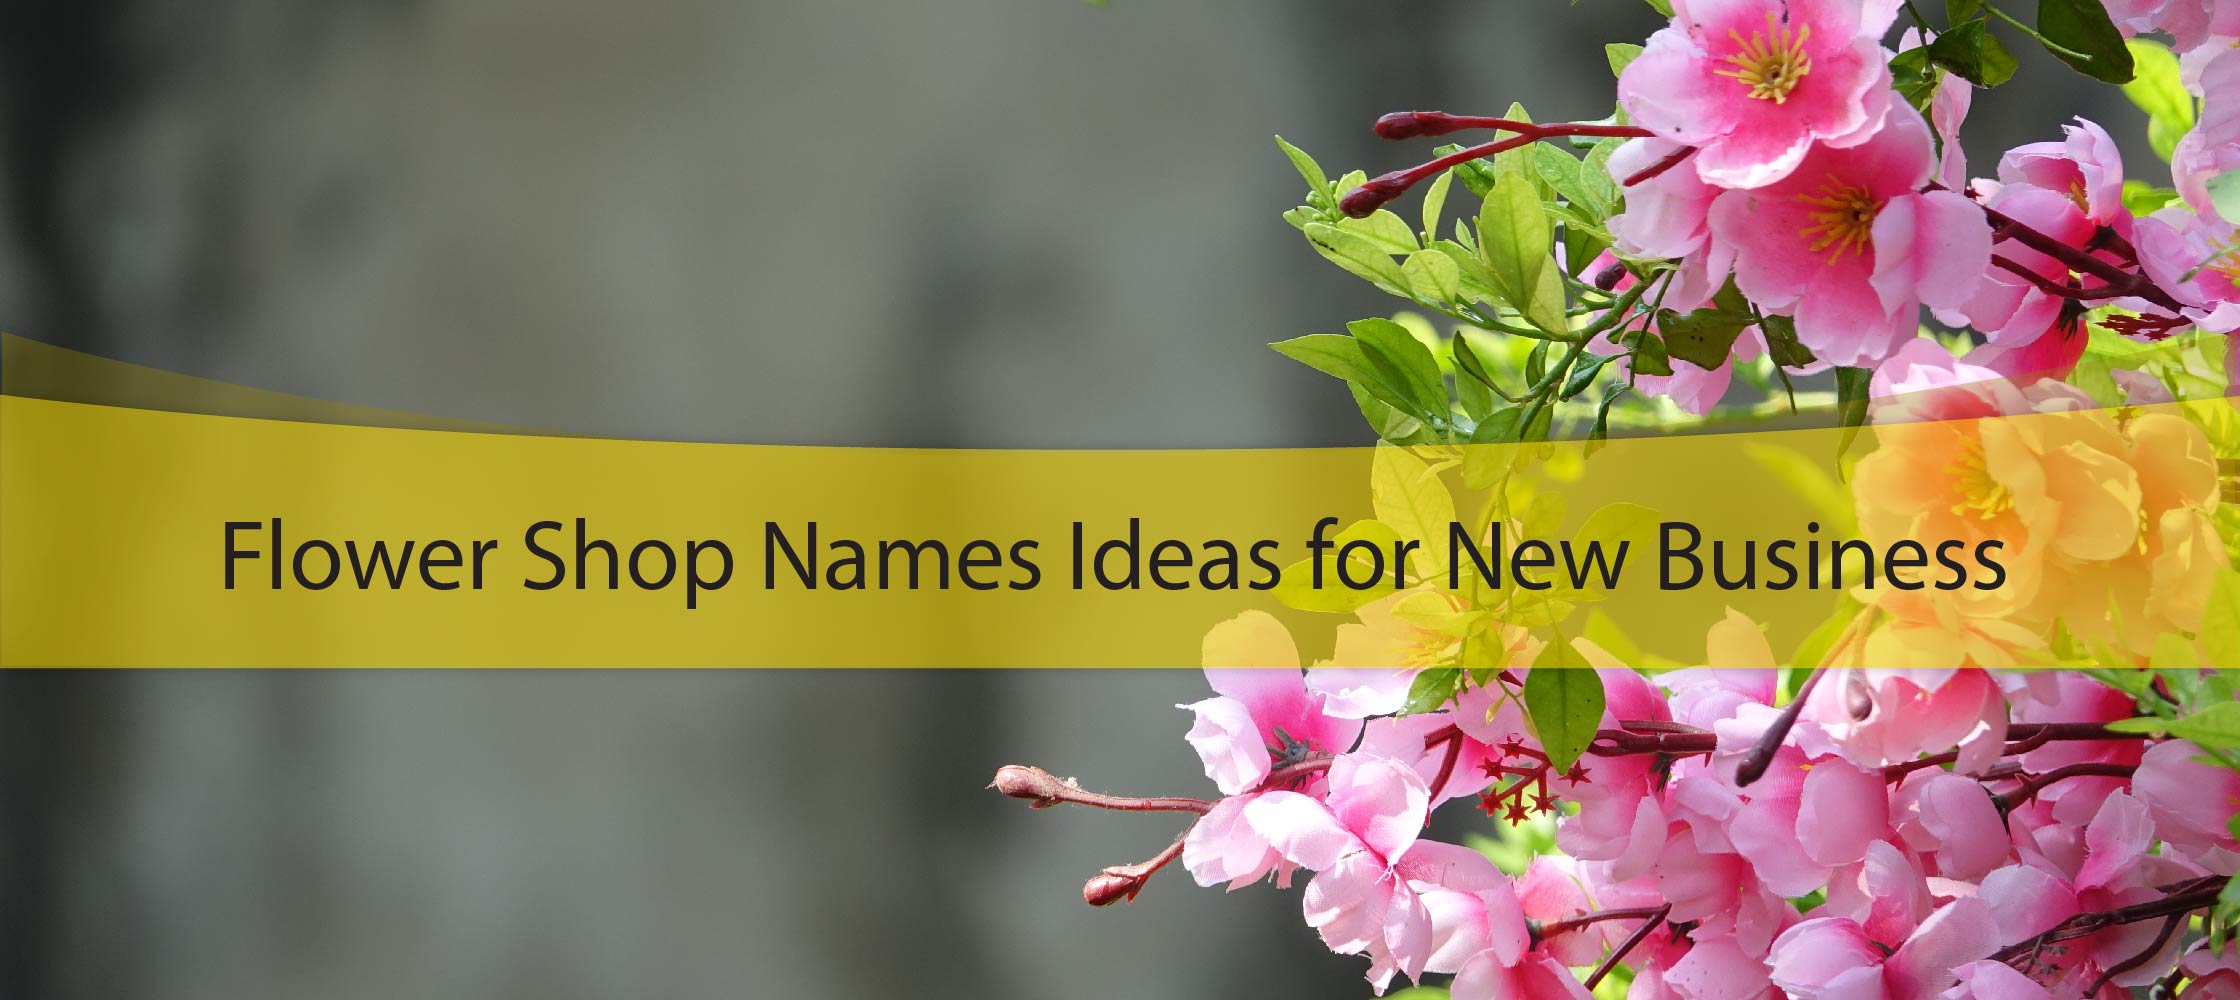 Flower Name Ideas for New Business